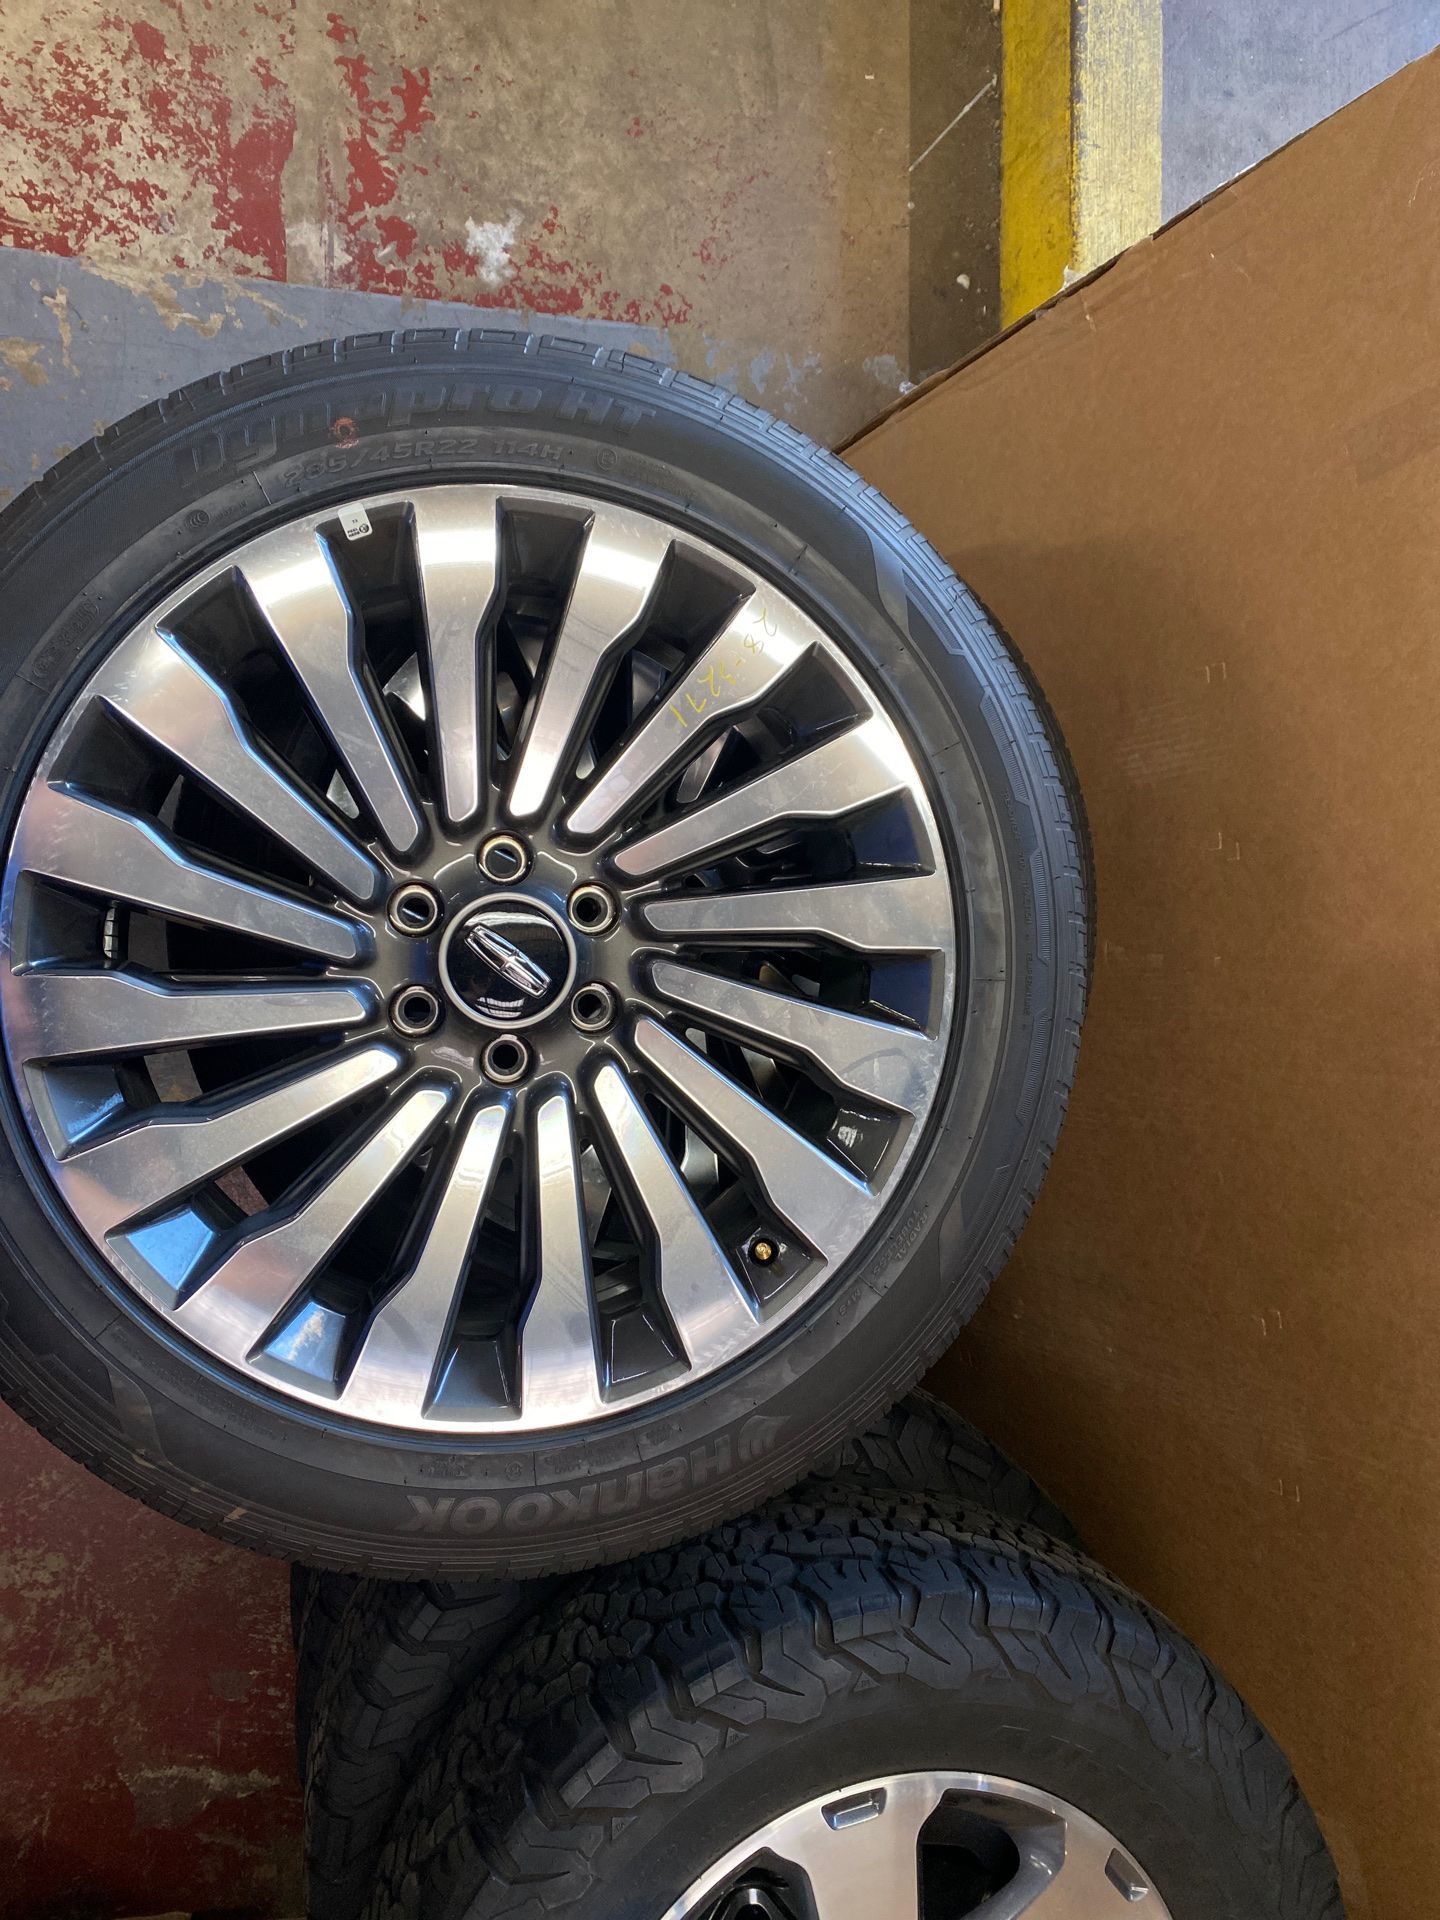 2020 new Lincoln navigator wheels and tires